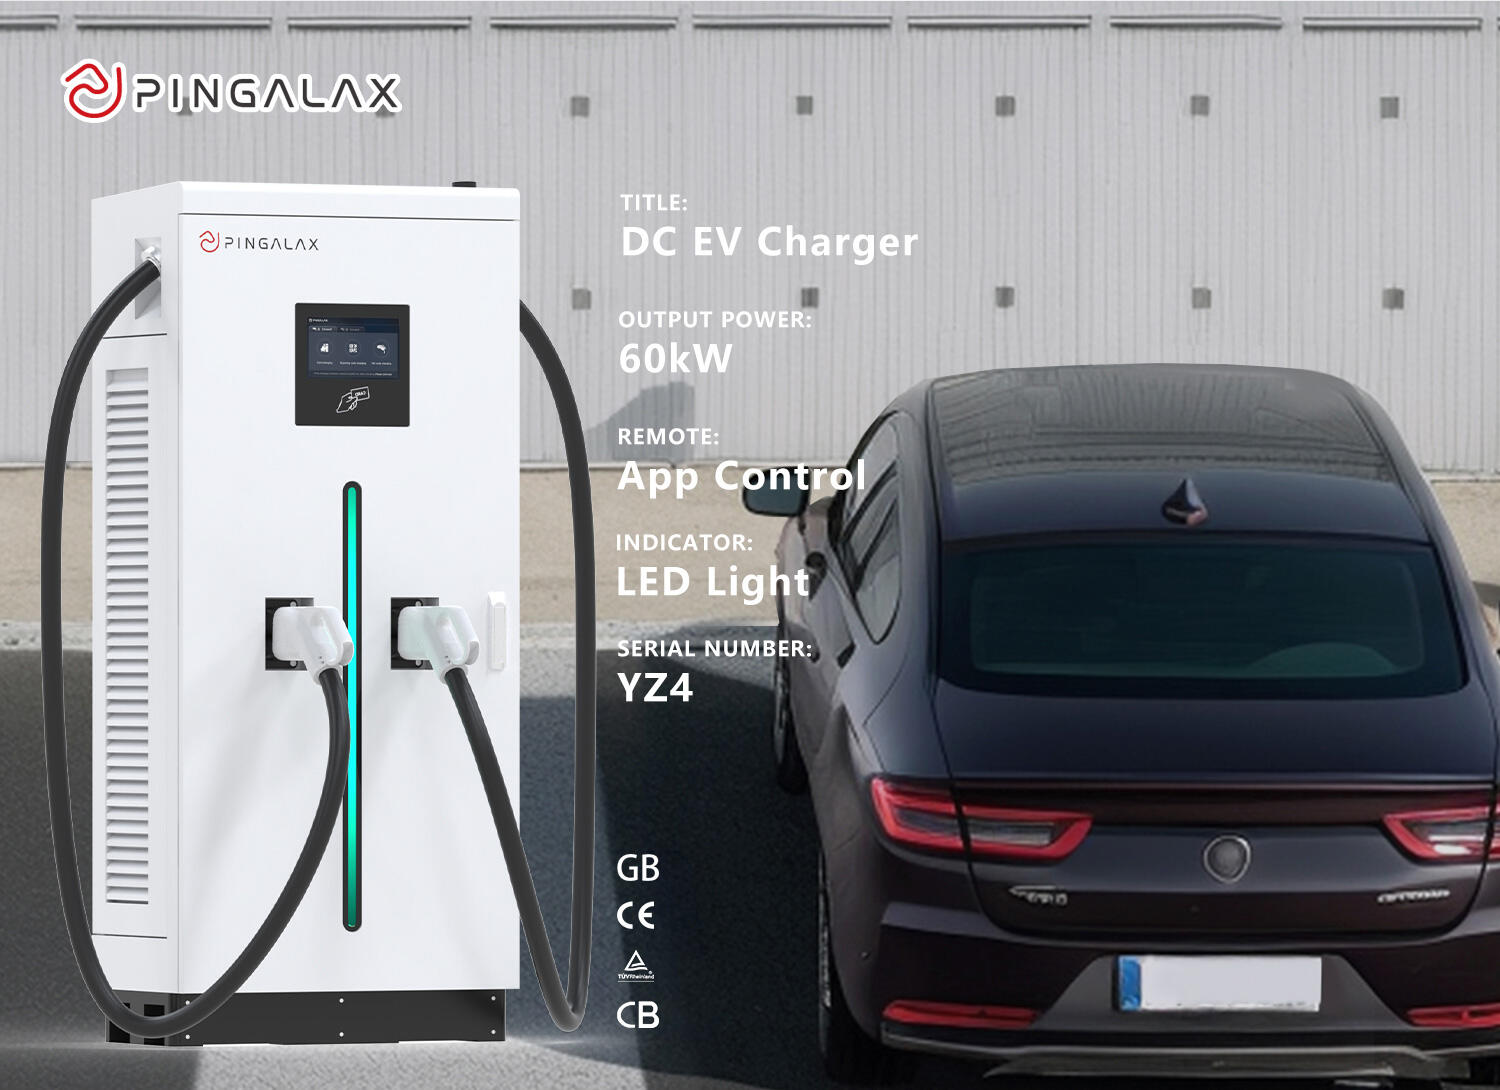 PINGALAX DC Charging Station YZ5 120KW 160KW 200KW 240KW details